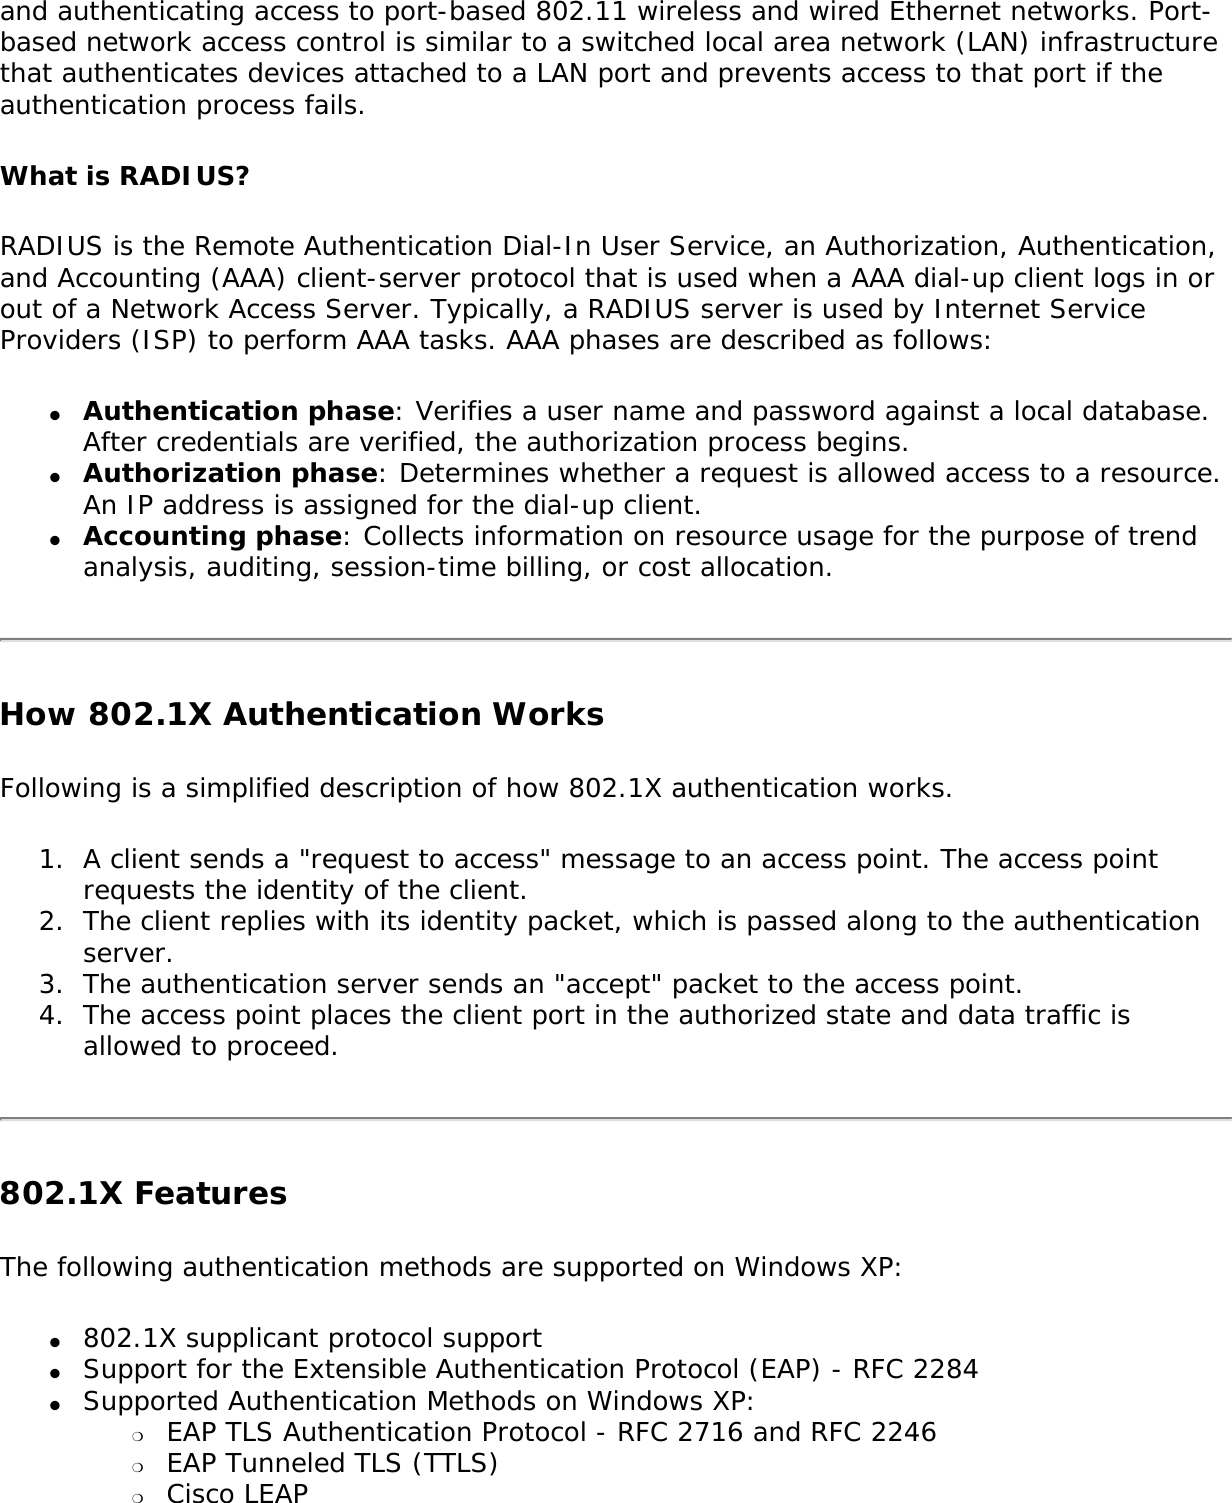 and authenticating access to port-based 802.11 wireless and wired Ethernet networks. Port-based network access control is similar to a switched local area network (LAN) infrastructure that authenticates devices attached to a LAN port and prevents access to that port if the authentication process fails.What is RADIUS?RADIUS is the Remote Authentication Dial-In User Service, an Authorization, Authentication, and Accounting (AAA) client-server protocol that is used when a AAA dial-up client logs in or out of a Network Access Server. Typically, a RADIUS server is used by Internet Service Providers (ISP) to perform AAA tasks. AAA phases are described as follows:●     Authentication phase: Verifies a user name and password against a local database. After credentials are verified, the authorization process begins.●     Authorization phase: Determines whether a request is allowed access to a resource. An IP address is assigned for the dial-up client.●     Accounting phase: Collects information on resource usage for the purpose of trend analysis, auditing, session-time billing, or cost allocation.How 802.1X Authentication WorksFollowing is a simplified description of how 802.1X authentication works.1.  A client sends a &quot;request to access&quot; message to an access point. The access point requests the identity of the client. 2.  The client replies with its identity packet, which is passed along to the authentication server.3.  The authentication server sends an &quot;accept&quot; packet to the access point.4.  The access point places the client port in the authorized state and data traffic is allowed to proceed.802.1X FeaturesThe following authentication methods are supported on Windows XP:●     802.1X supplicant protocol support●     Support for the Extensible Authentication Protocol (EAP) - RFC 2284●     Supported Authentication Methods on Windows XP: ❍     EAP TLS Authentication Protocol - RFC 2716 and RFC 2246 ❍     EAP Tunneled TLS (TTLS) ❍     Cisco LEAP 